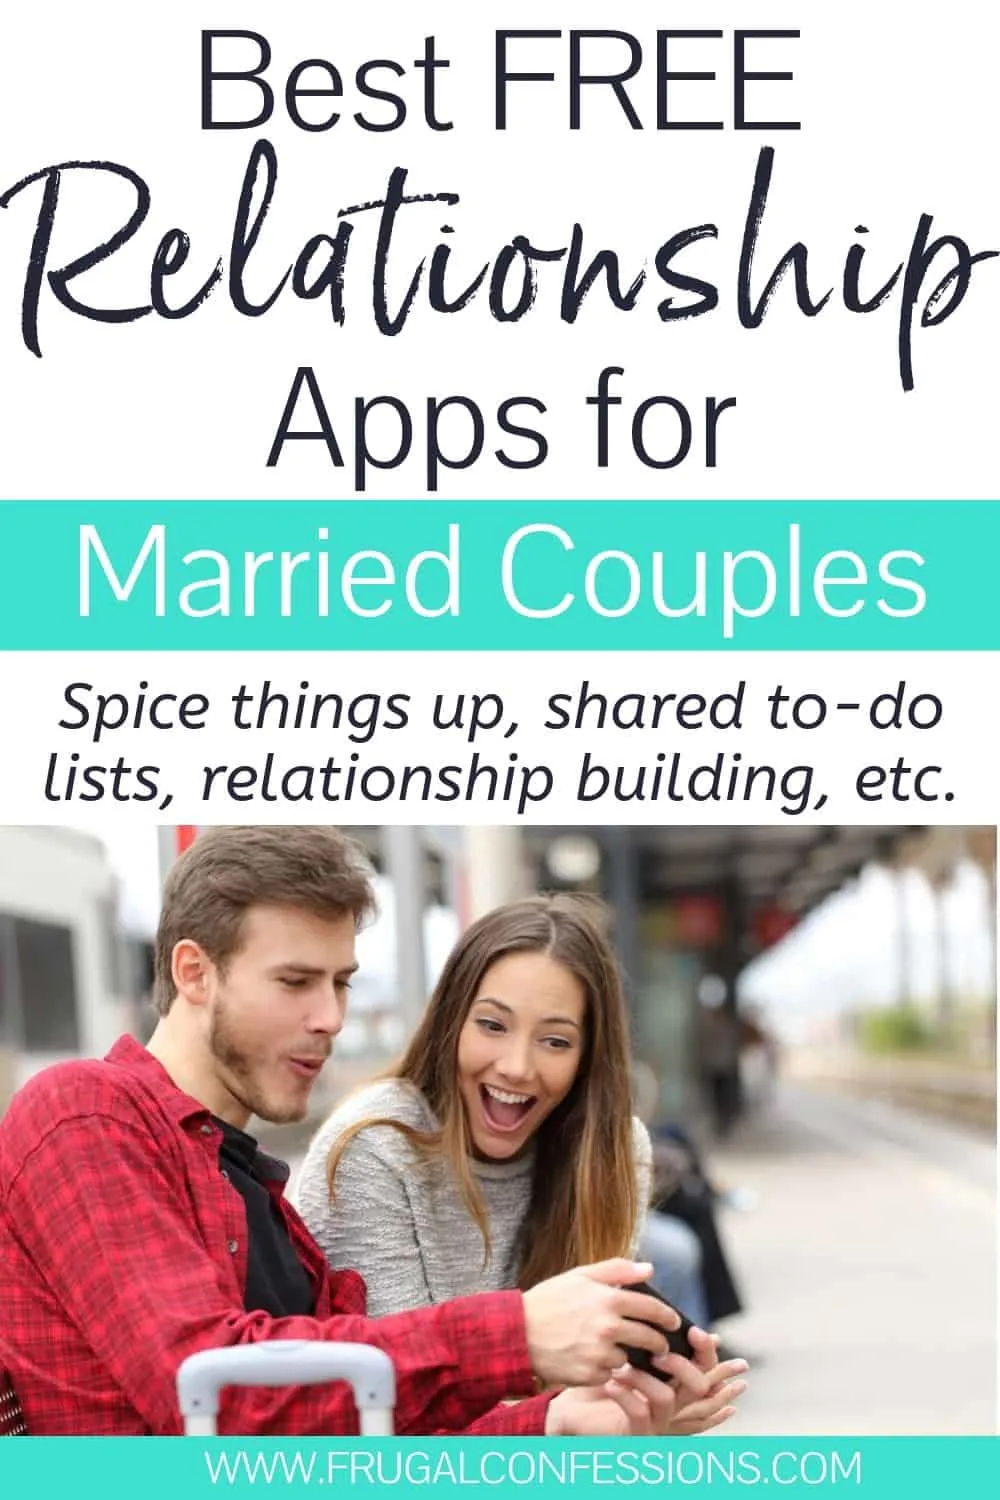 Acts to spice up a relationship